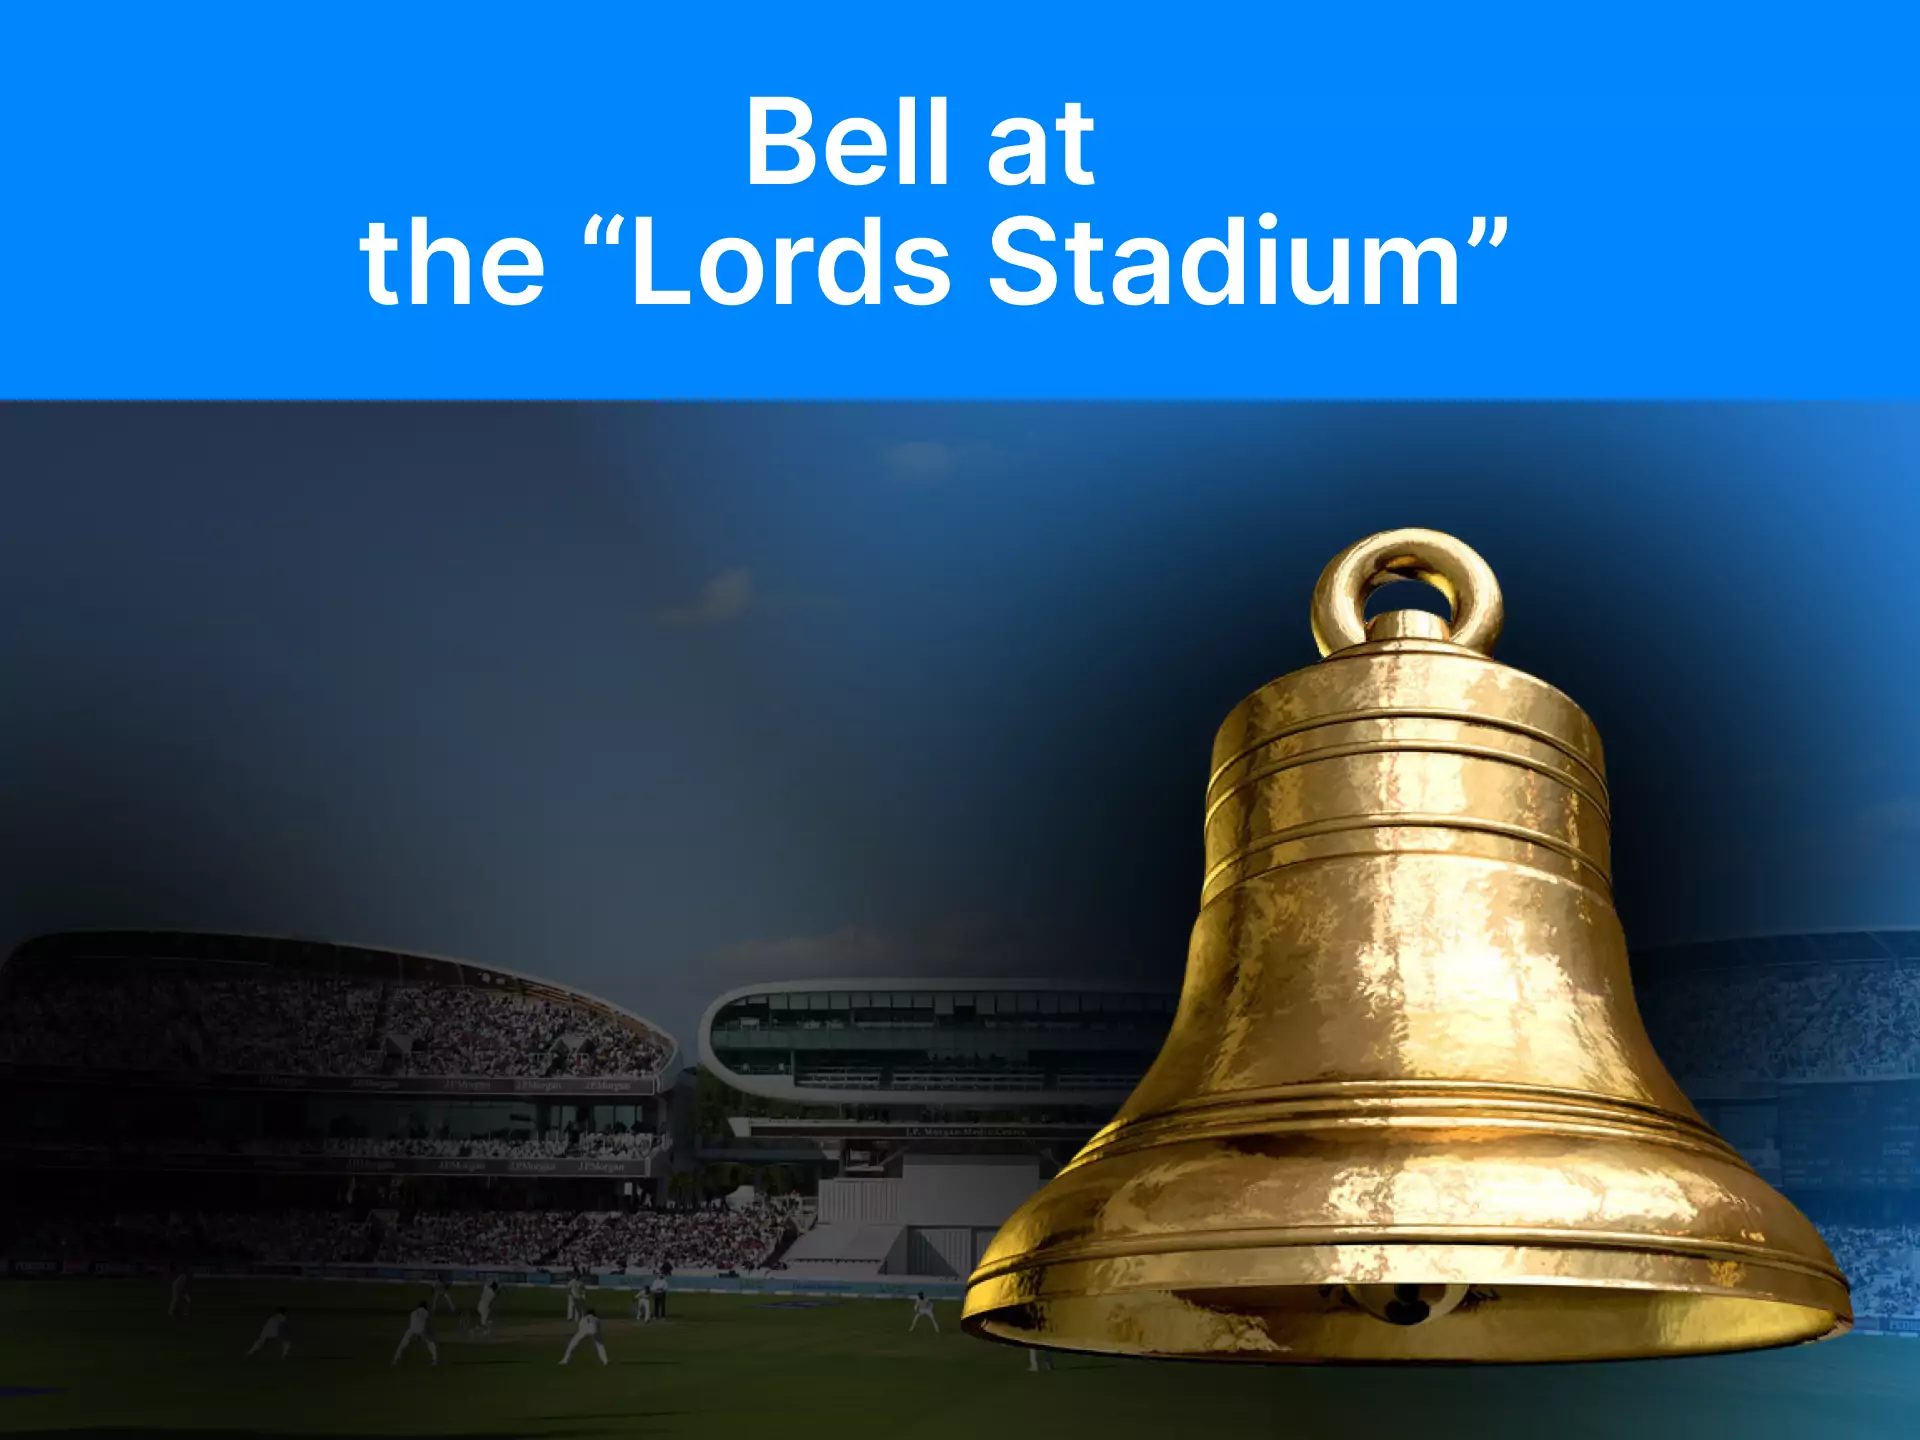 Learn what a bell at the "Lords Stadium" is and what it means to players and cricket fans.